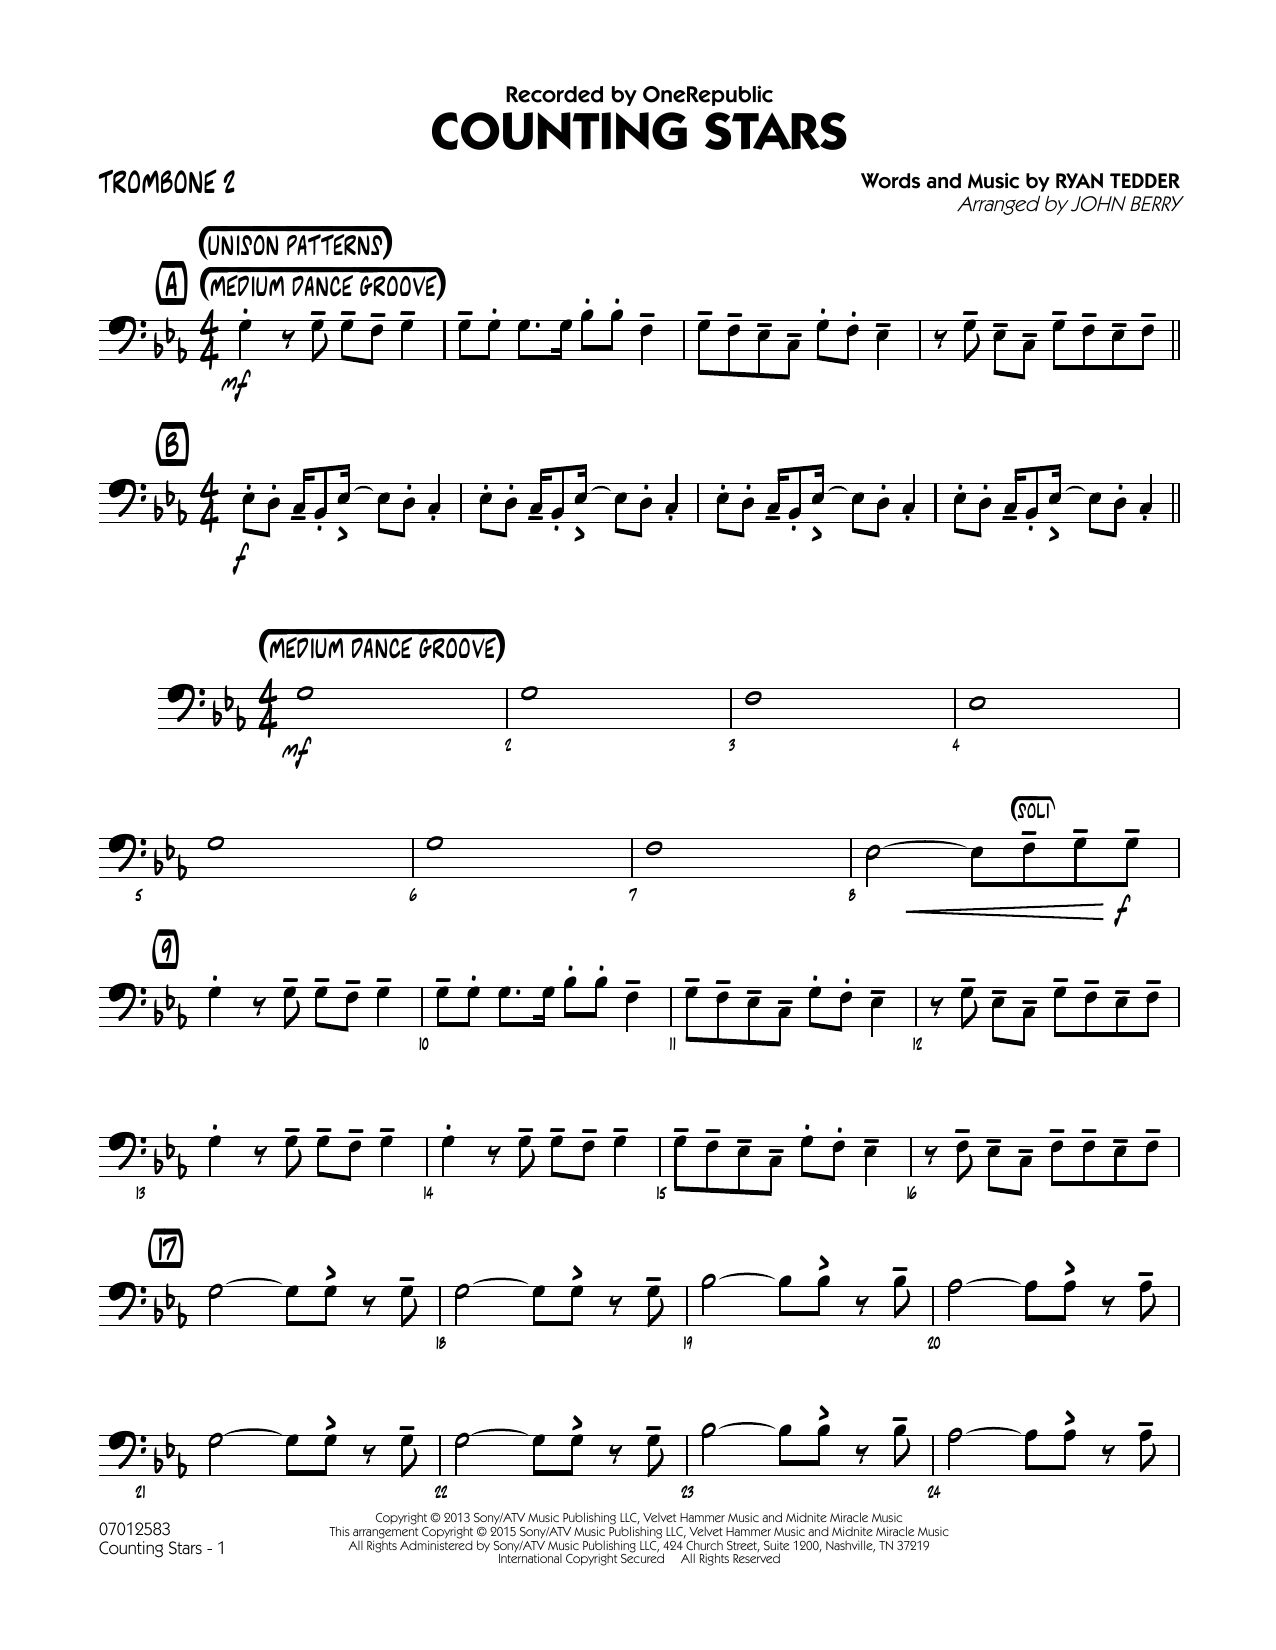 John Berry Counting Stars - Trombone 2 sheet music notes and chords. Download Printable PDF.